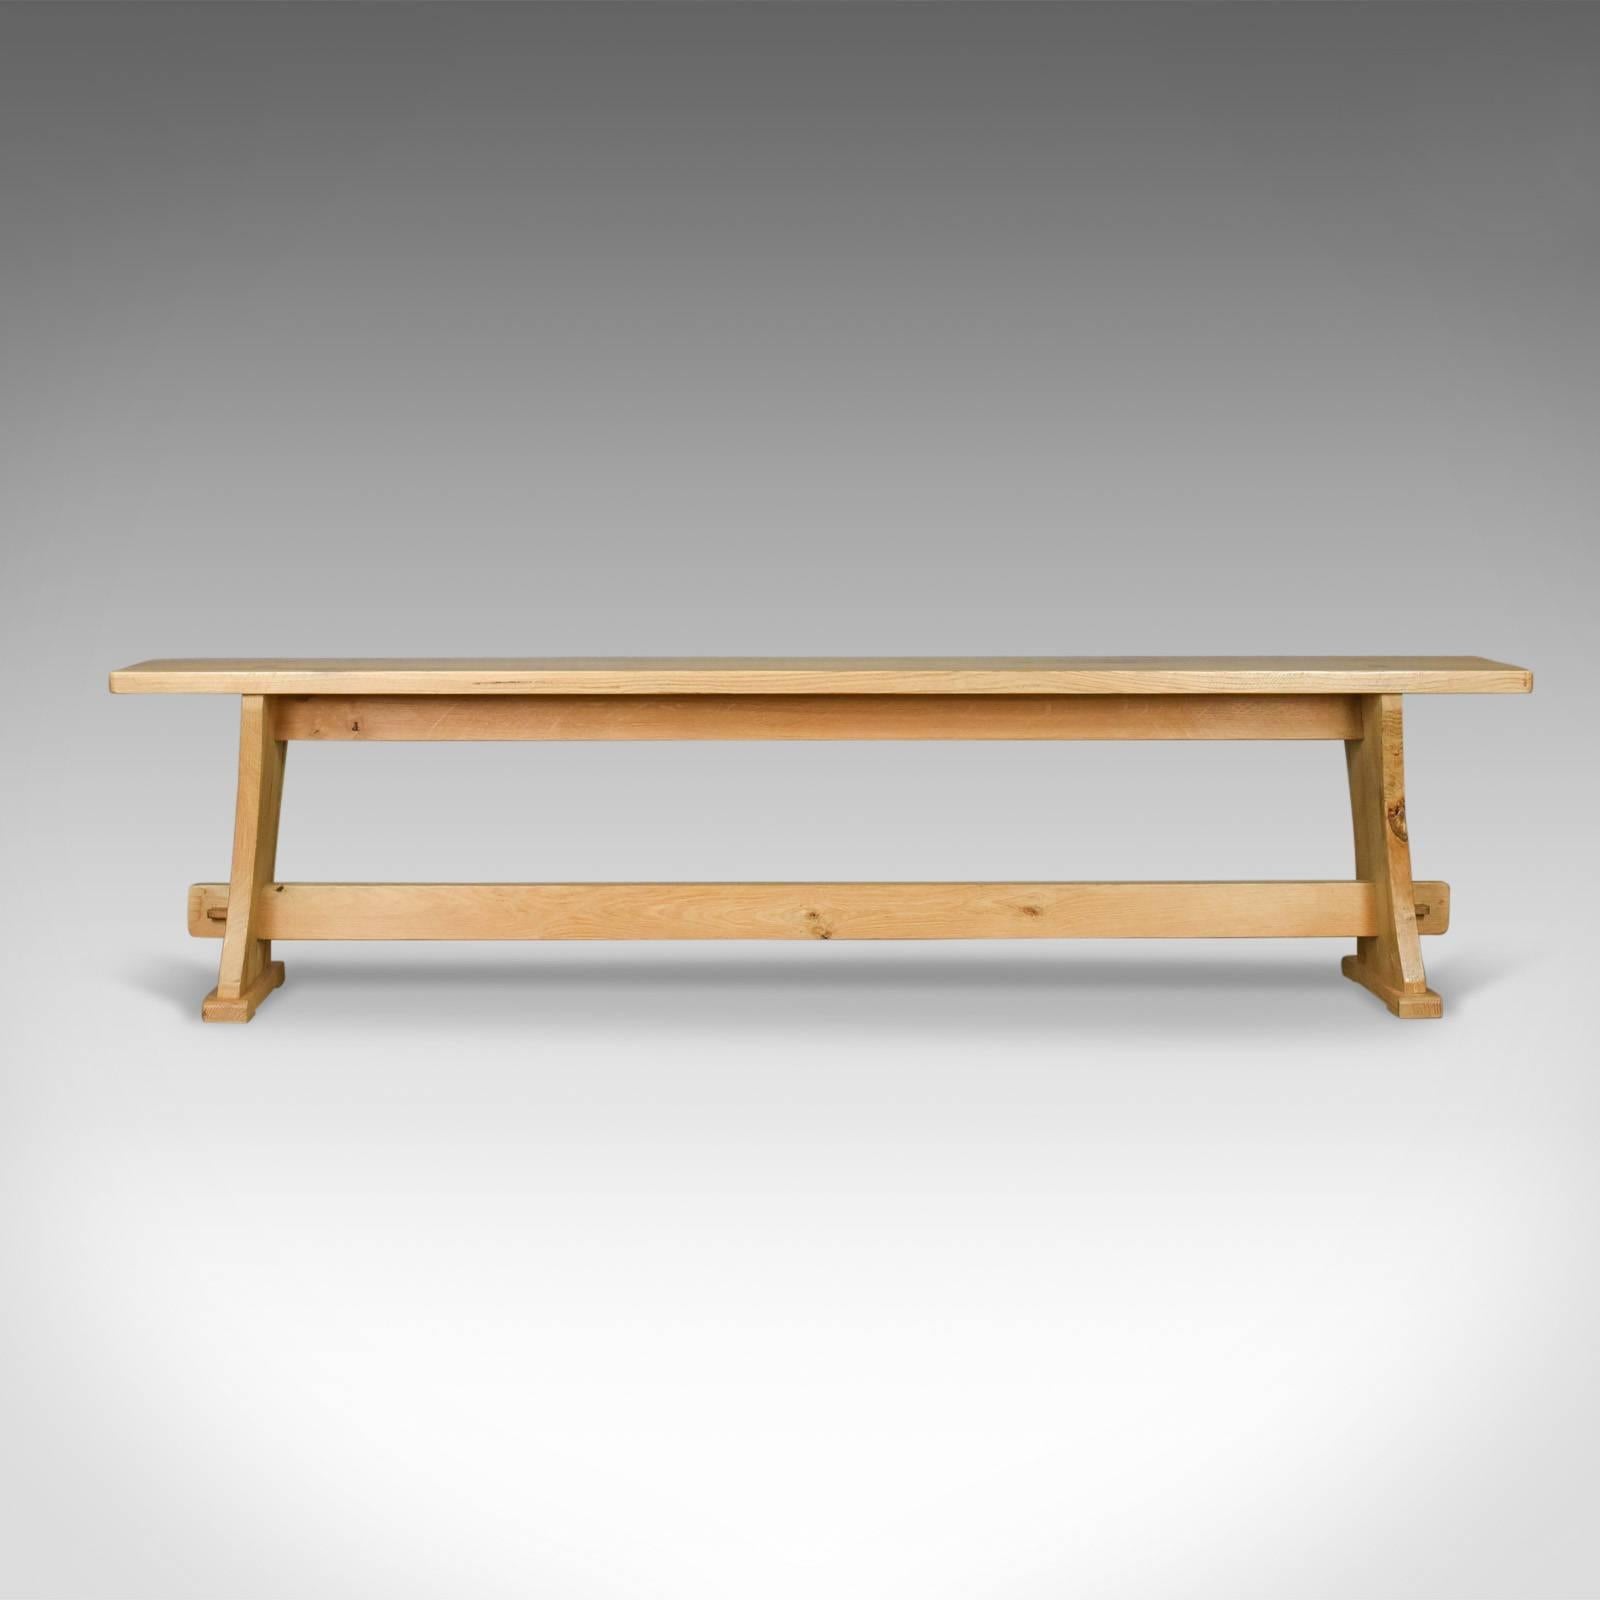 This is an English oak bench in the Victorian taste, a long, four-seat kitchen form dating to the late 20th century.

Substantial, solid, heavy English oak
Displaying good light color with grain interest
Traditionally crafted with through